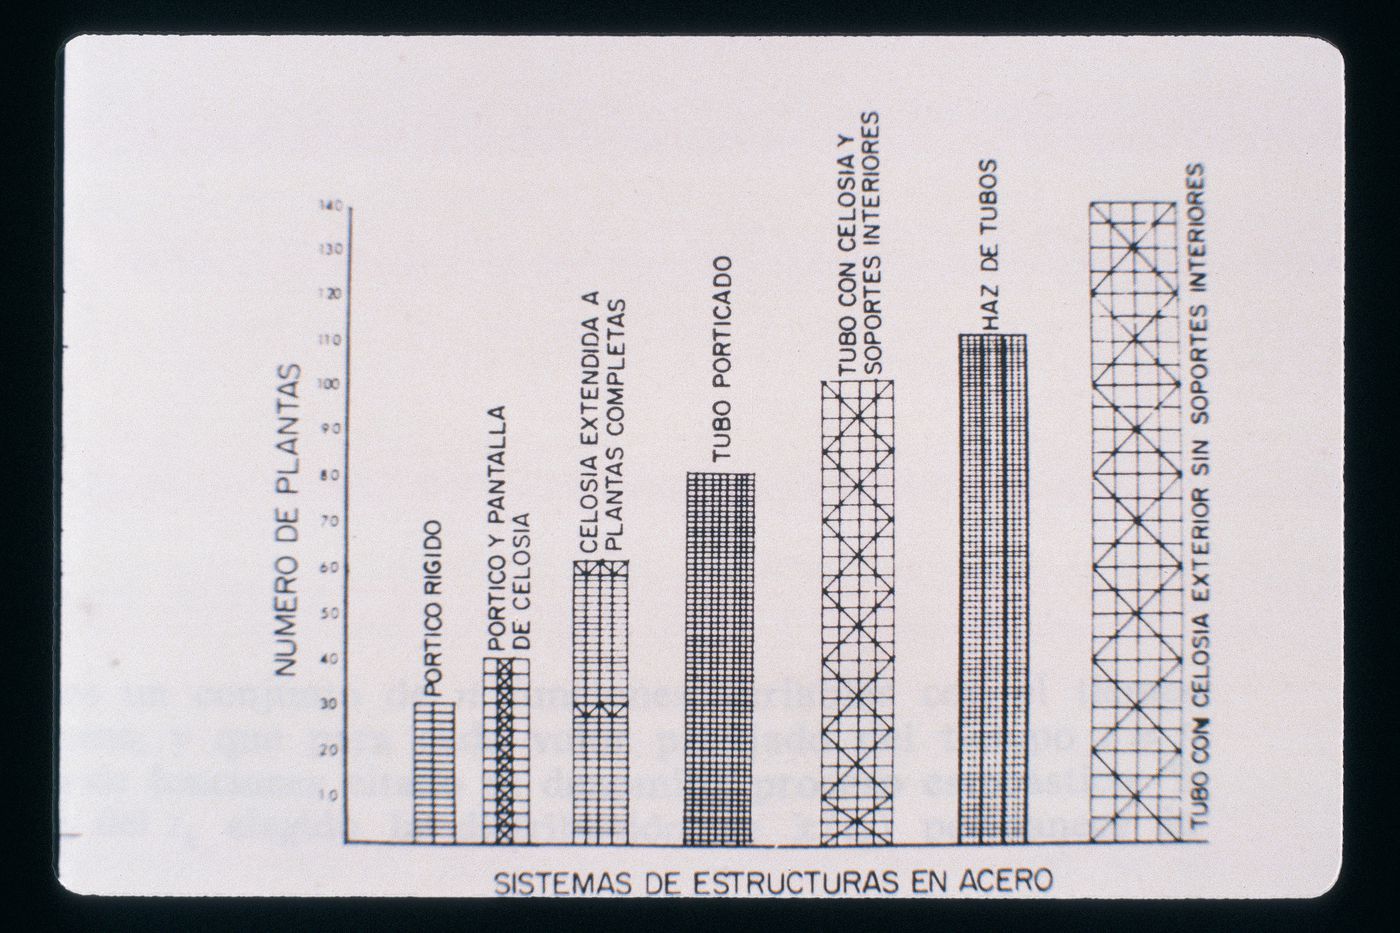 Slide of a drawing for Heights for Structural Systems diagram, by Fazlur Khan